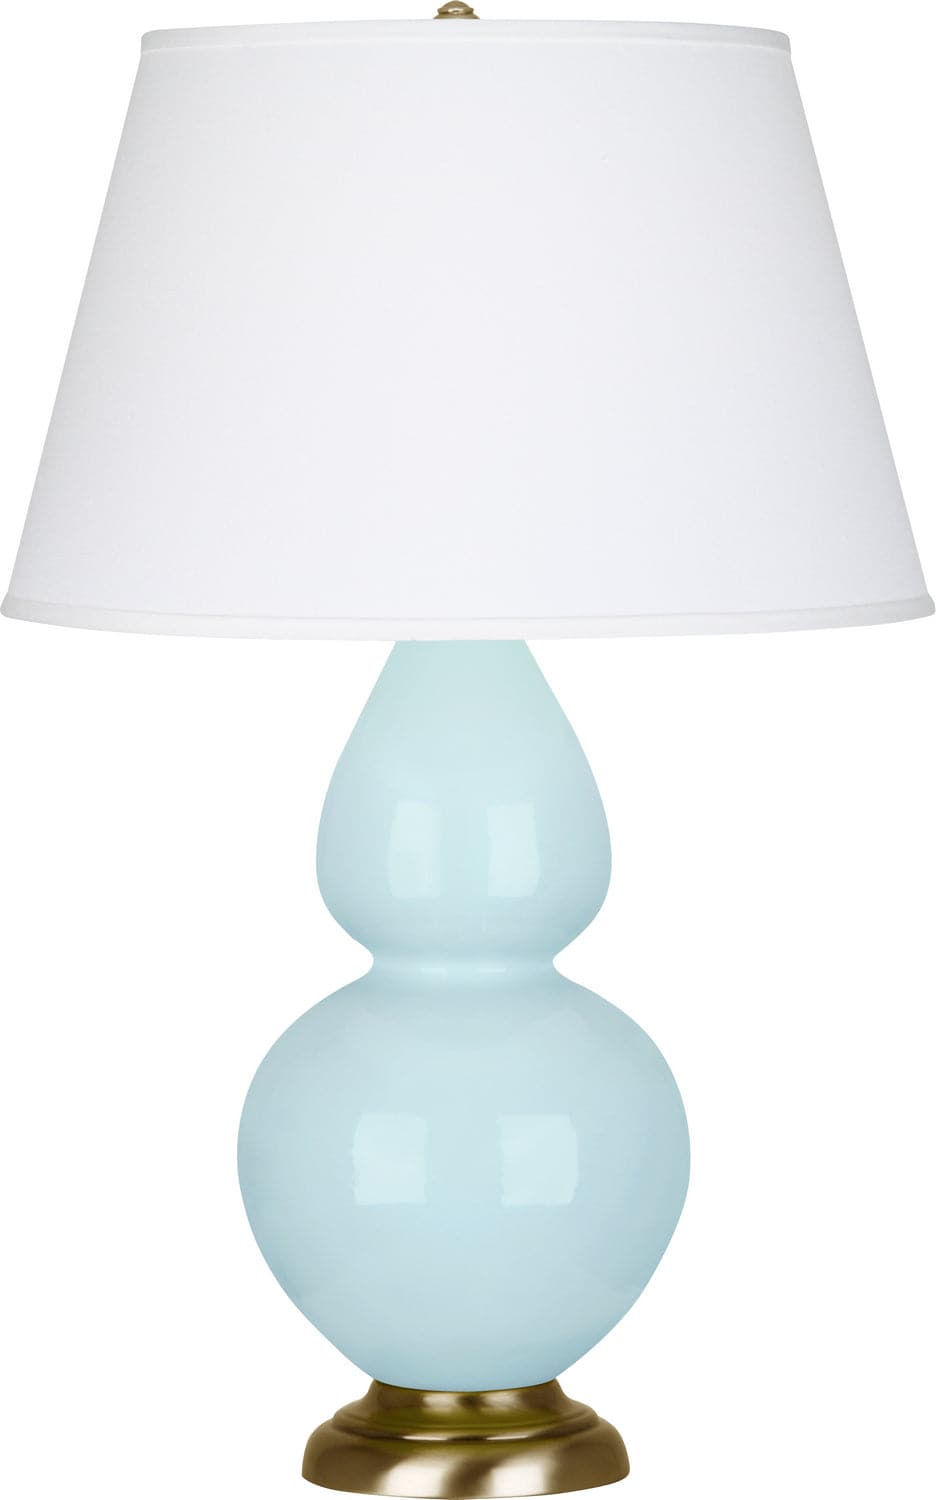 Robert Abbey - 1666X - One Light Table Lamp - Double Gourd - Baby Blue Glazed w/Antique Natural Brass